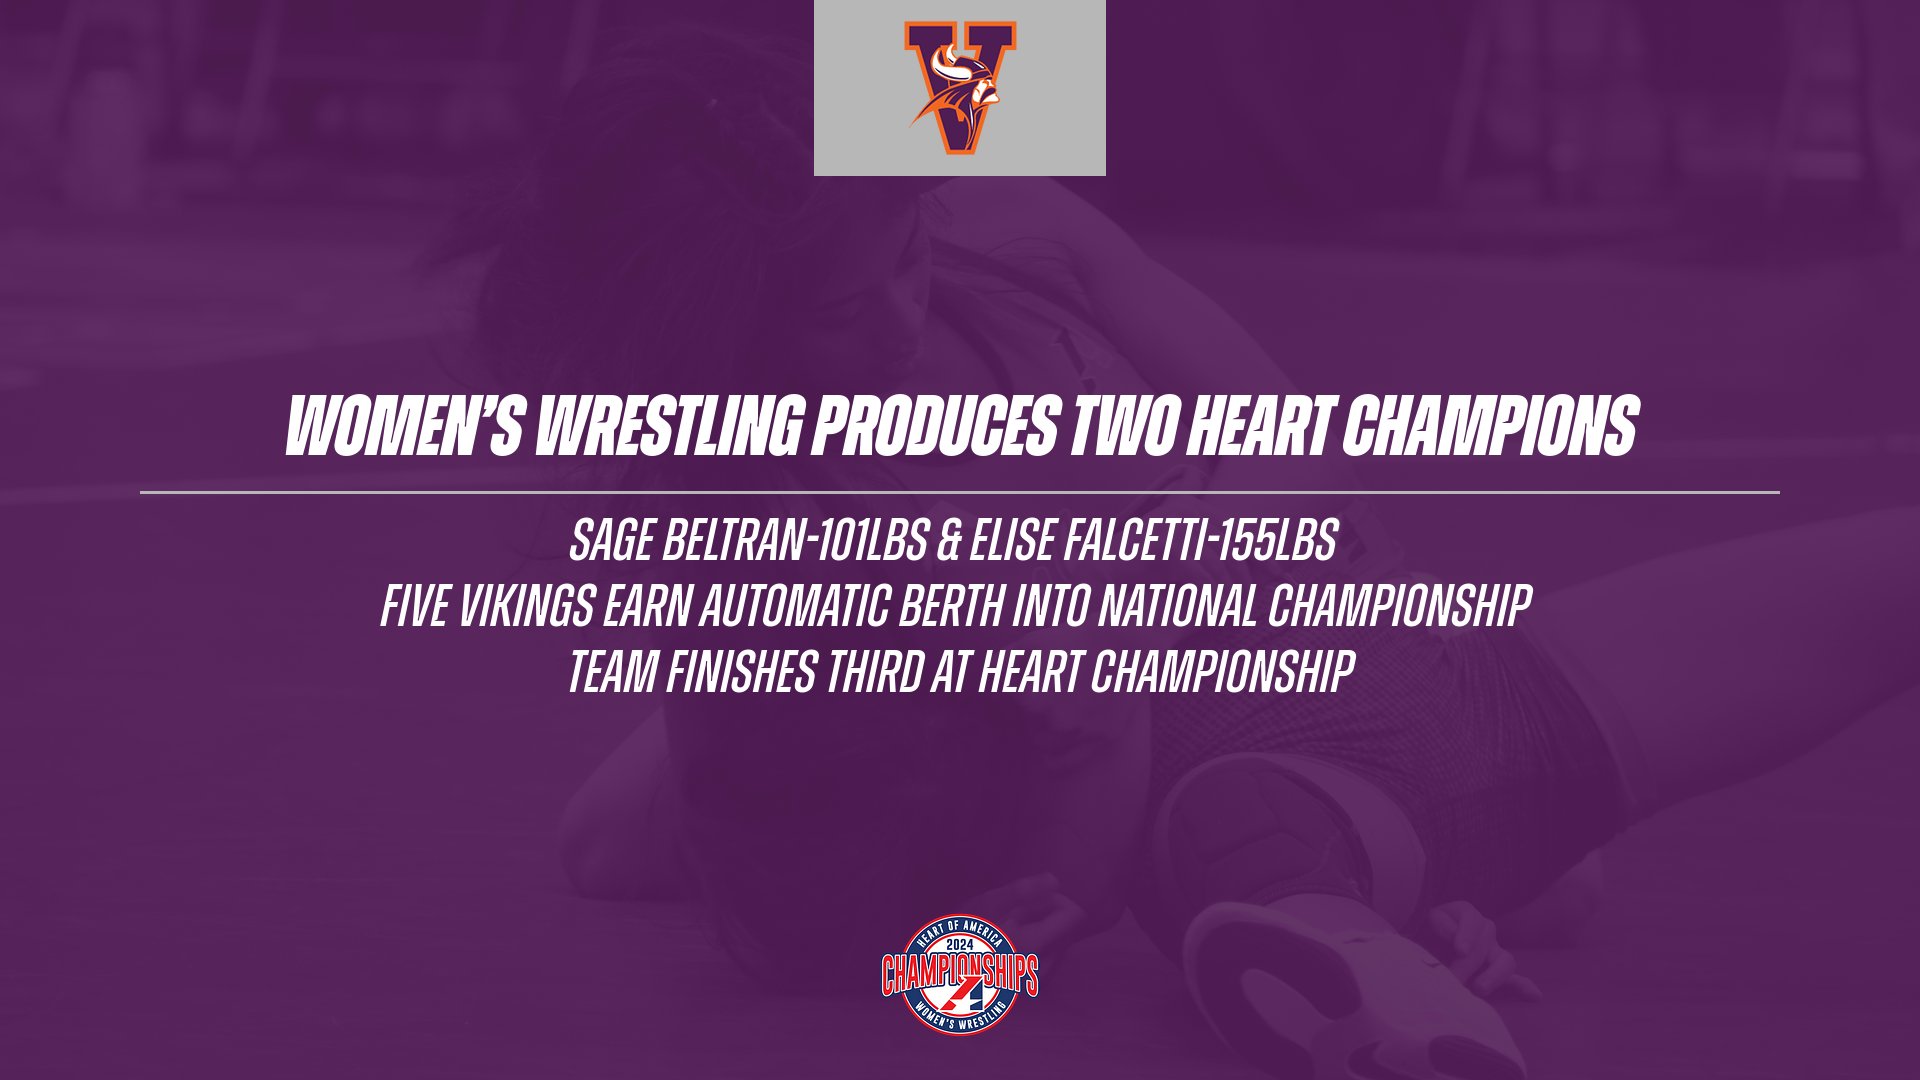 Two Champions Lead No. 13 Women's Wrestling at Heart Championship